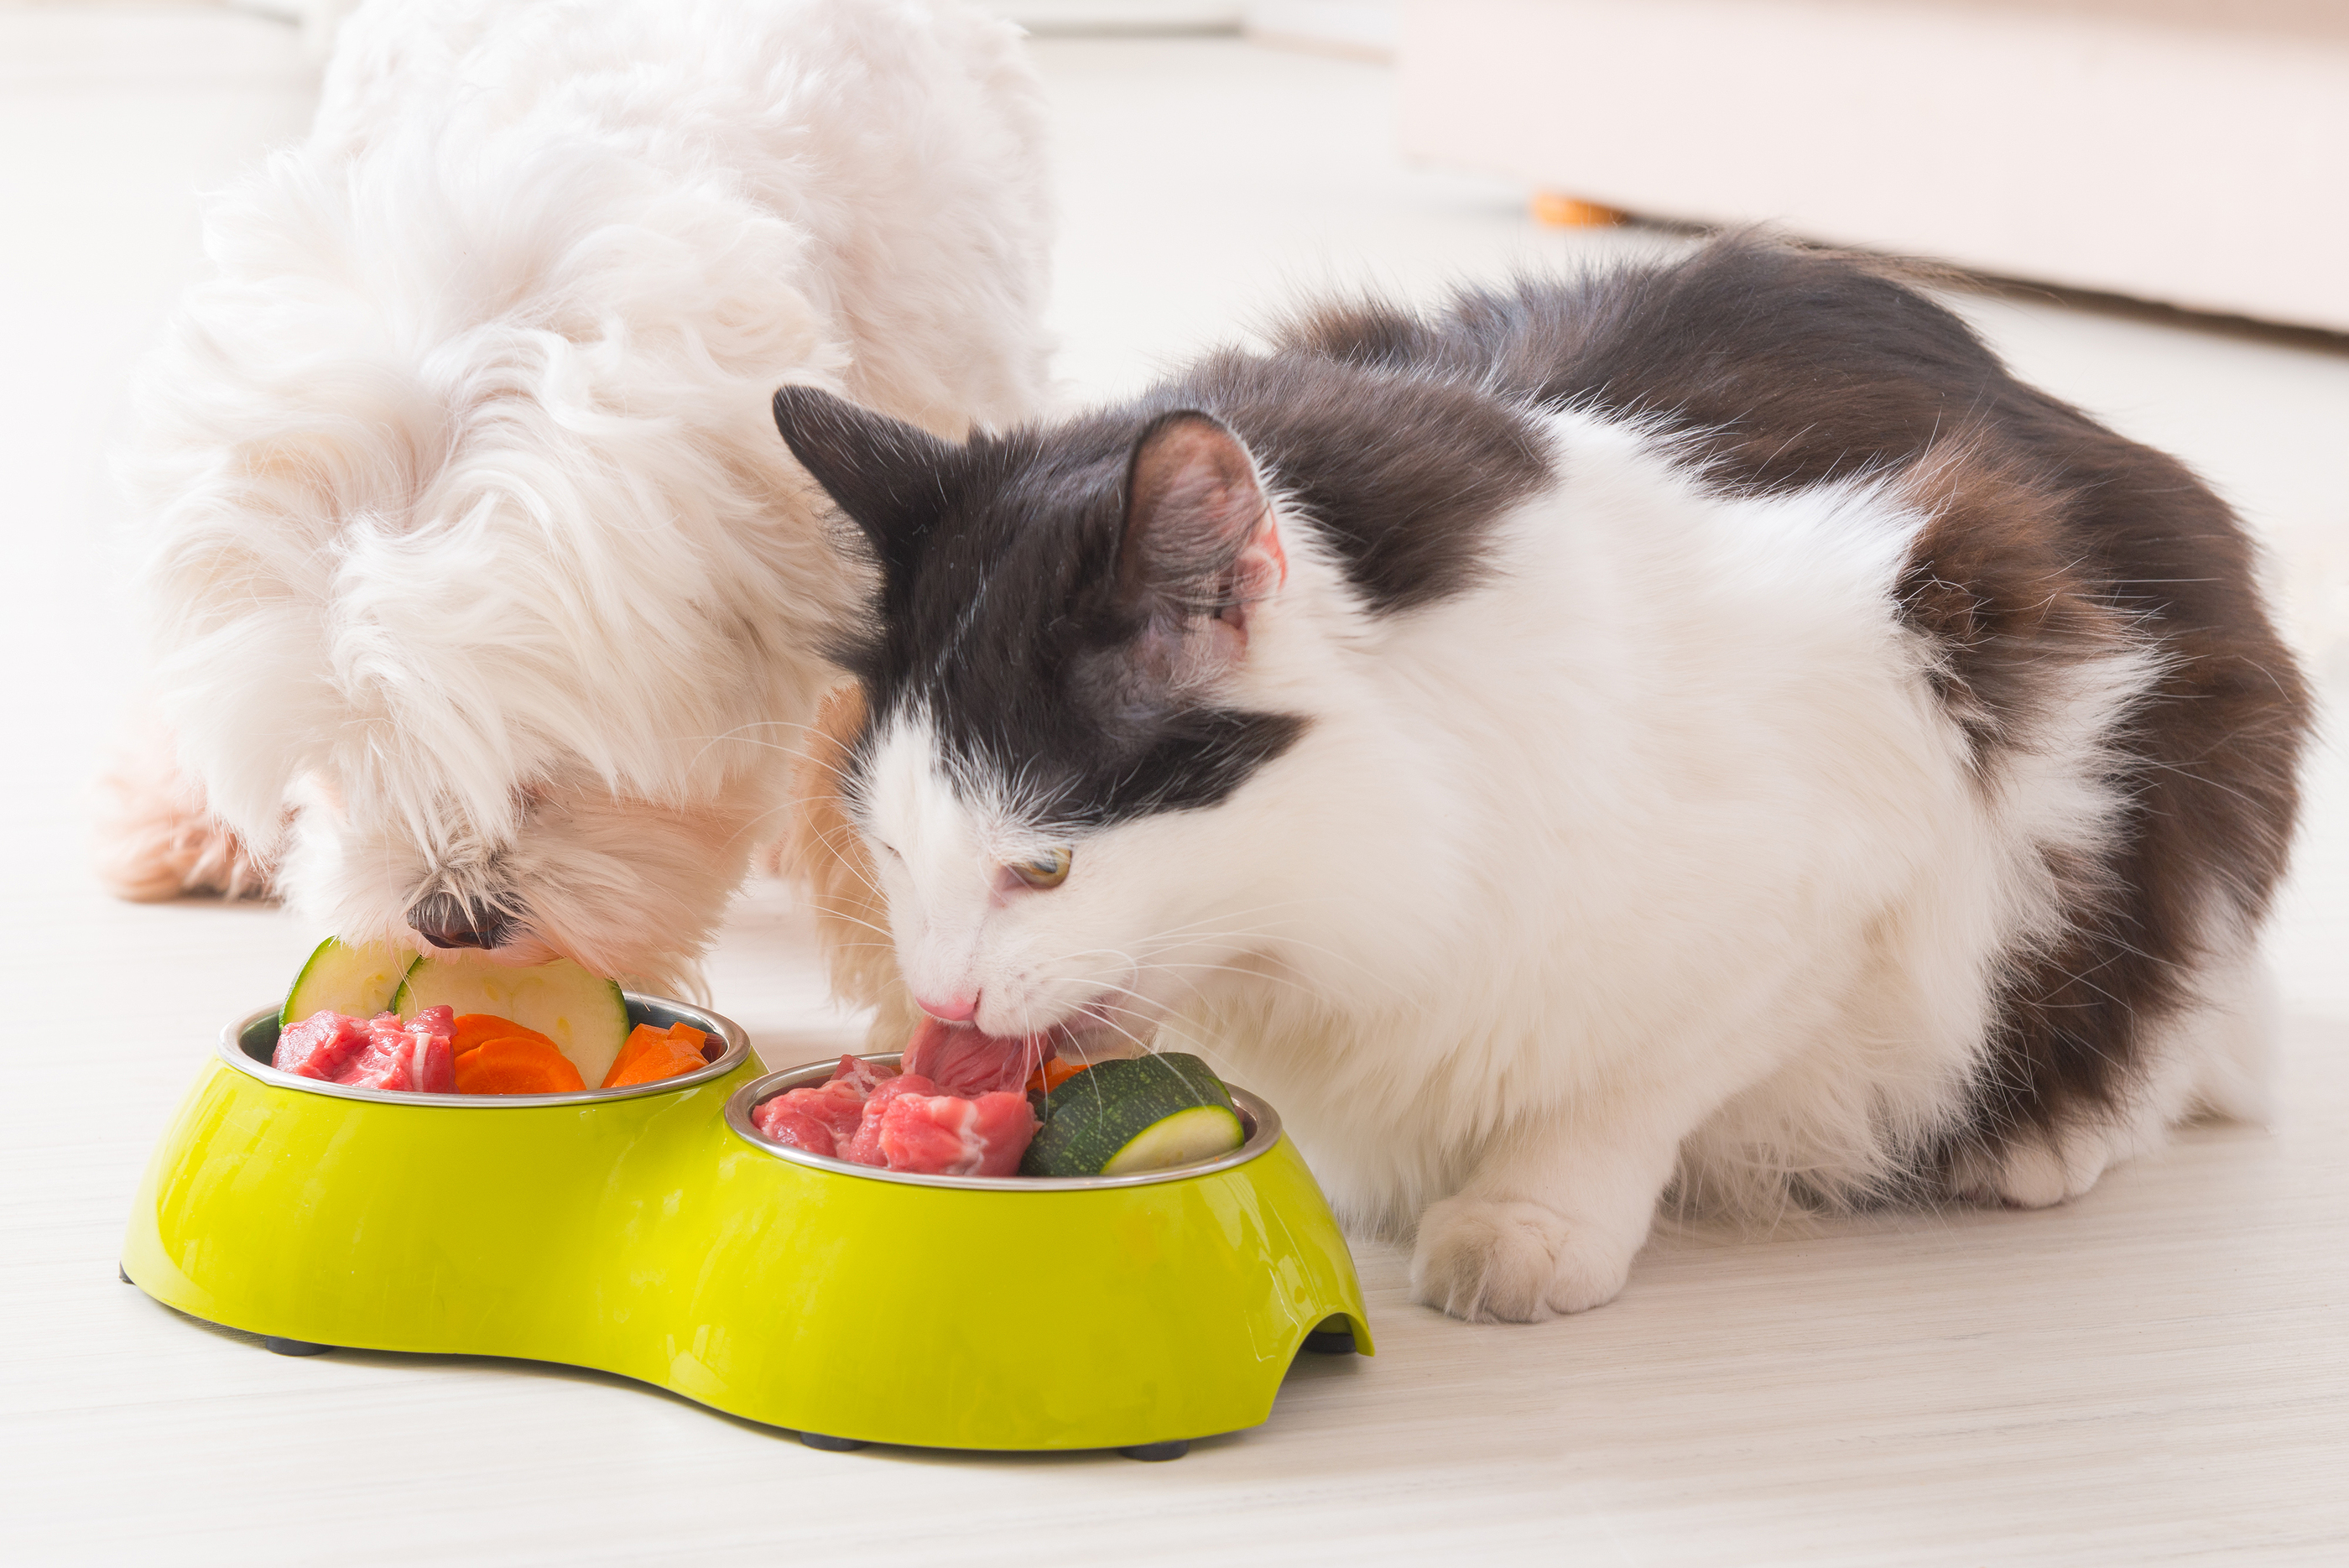 SOP Manual for Dog and Cat Food Manufacturing